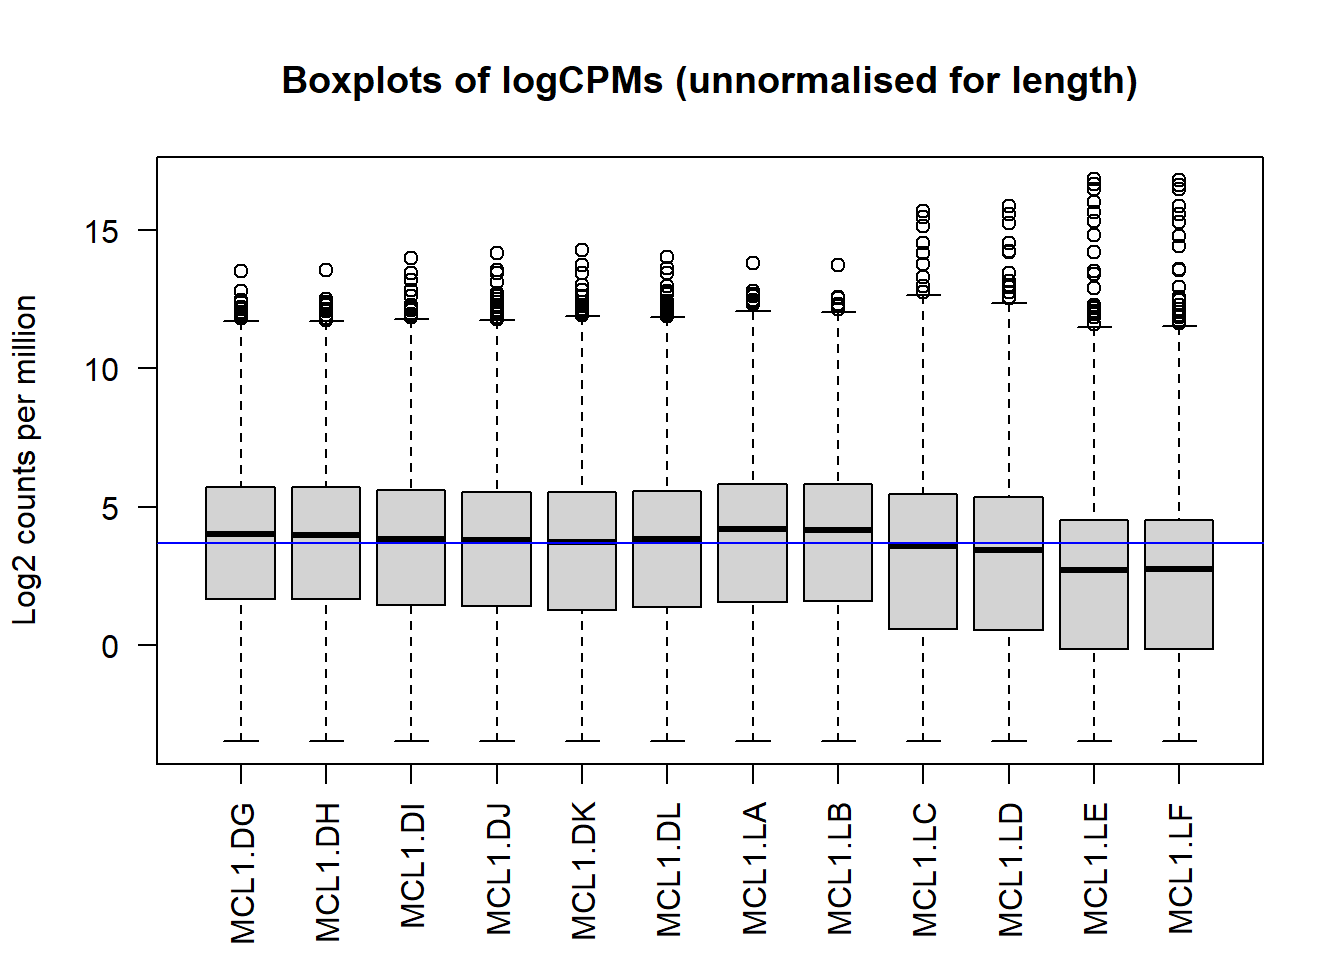 Natural log transformed CPM counts, normally-distributed but some outliers.